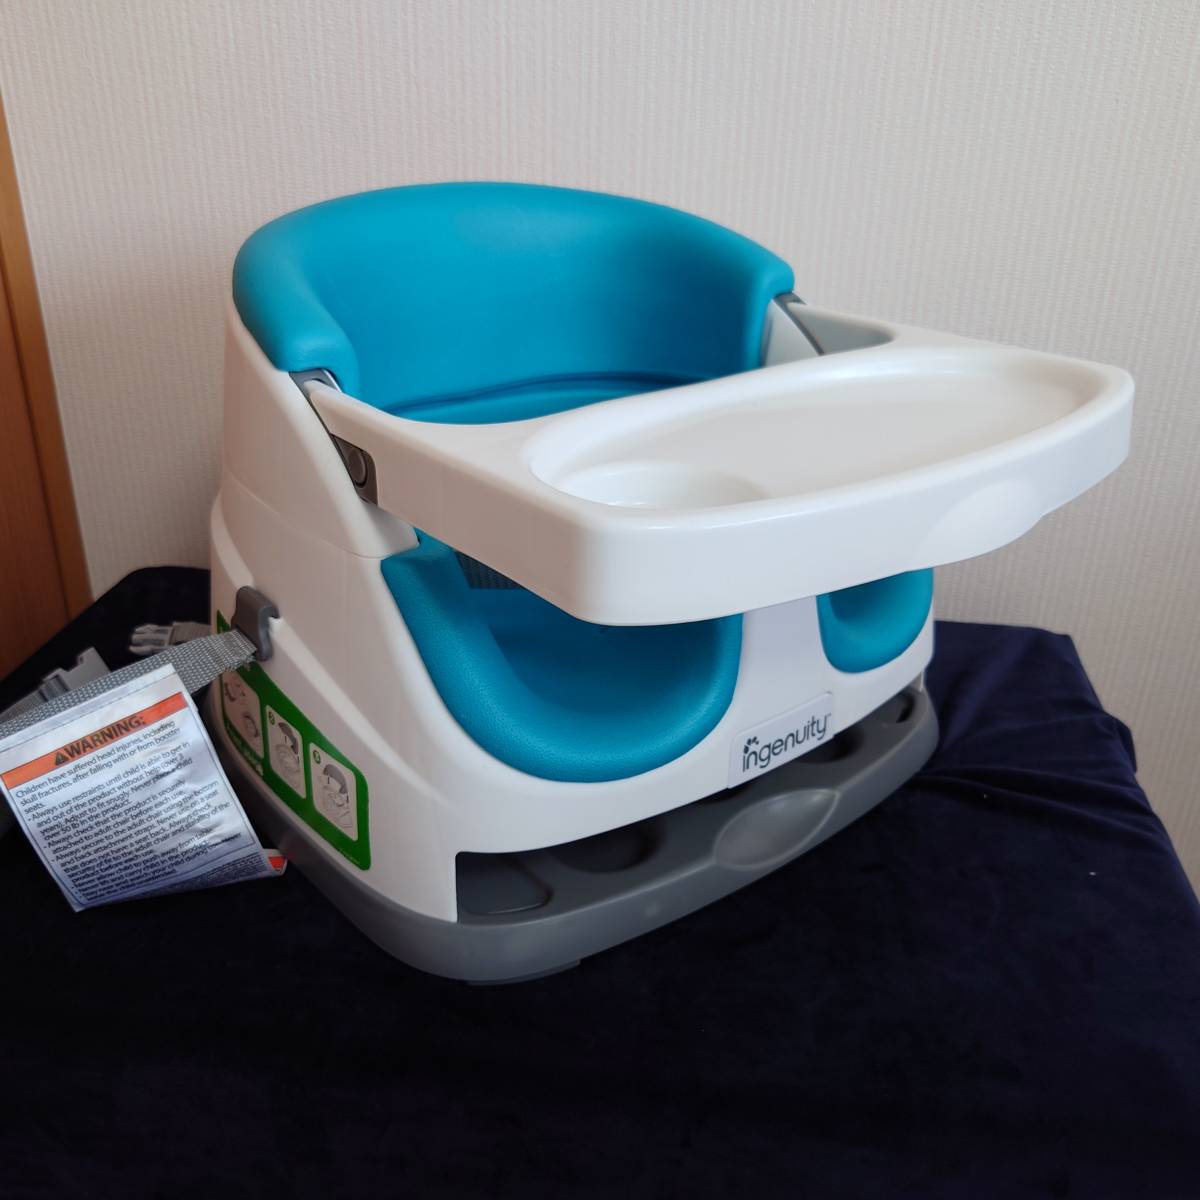 ingenuity in jenyuitiBaby Base baby base baby sofa blue belt kind all part attached does 